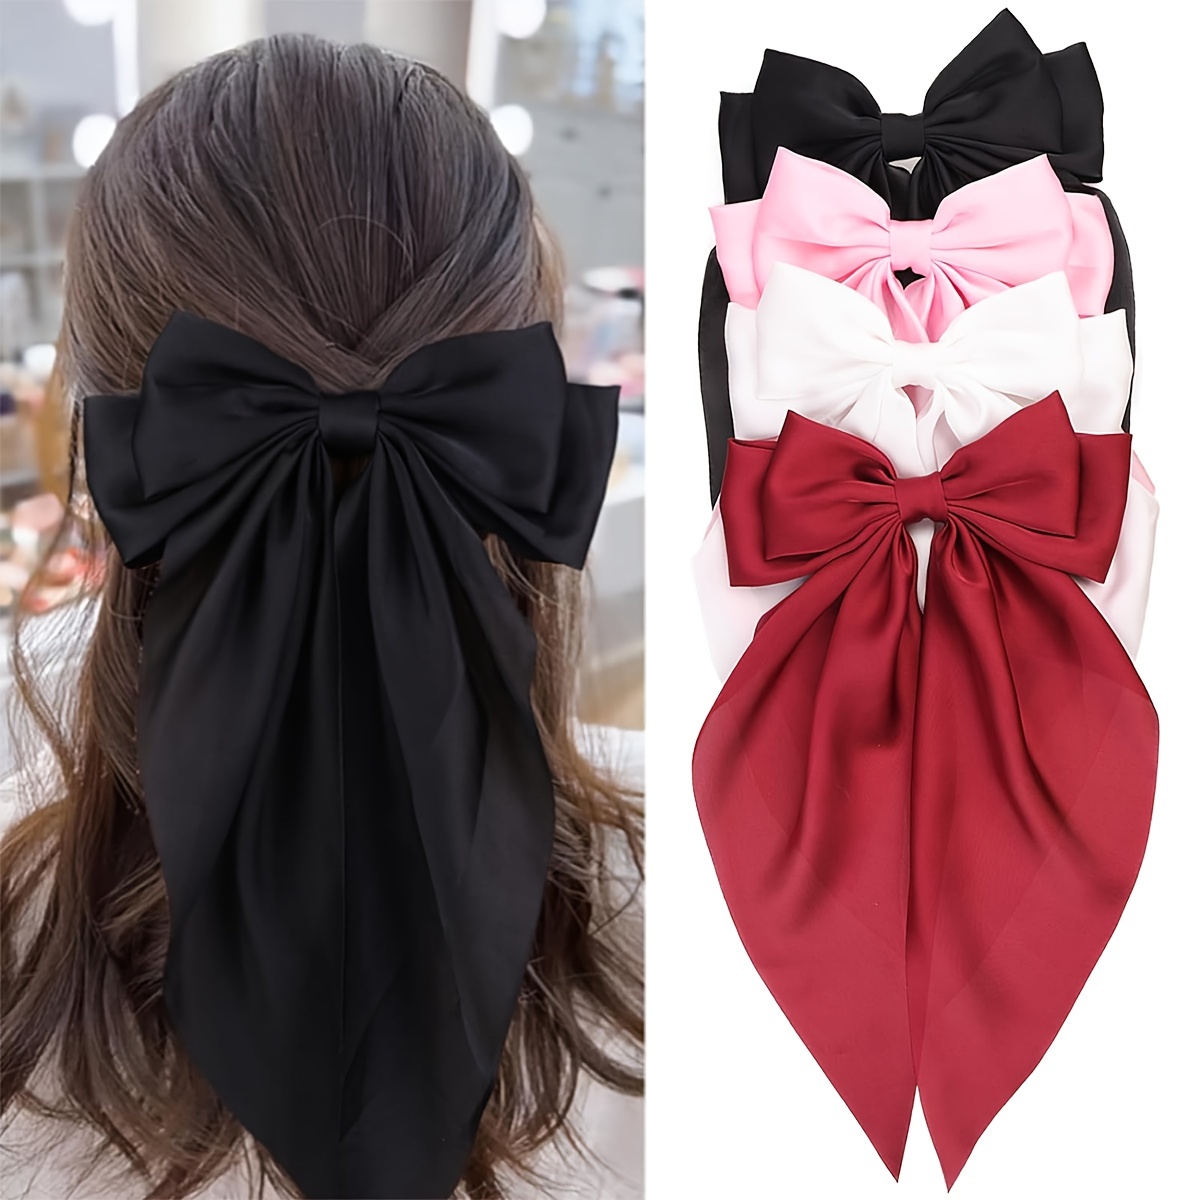 

Elegant 4-piece Satin Bow Hair Clips Set - Large, Cute Butterfly Barrettes In Black, White, Pink, Burgundy For Women And Girls